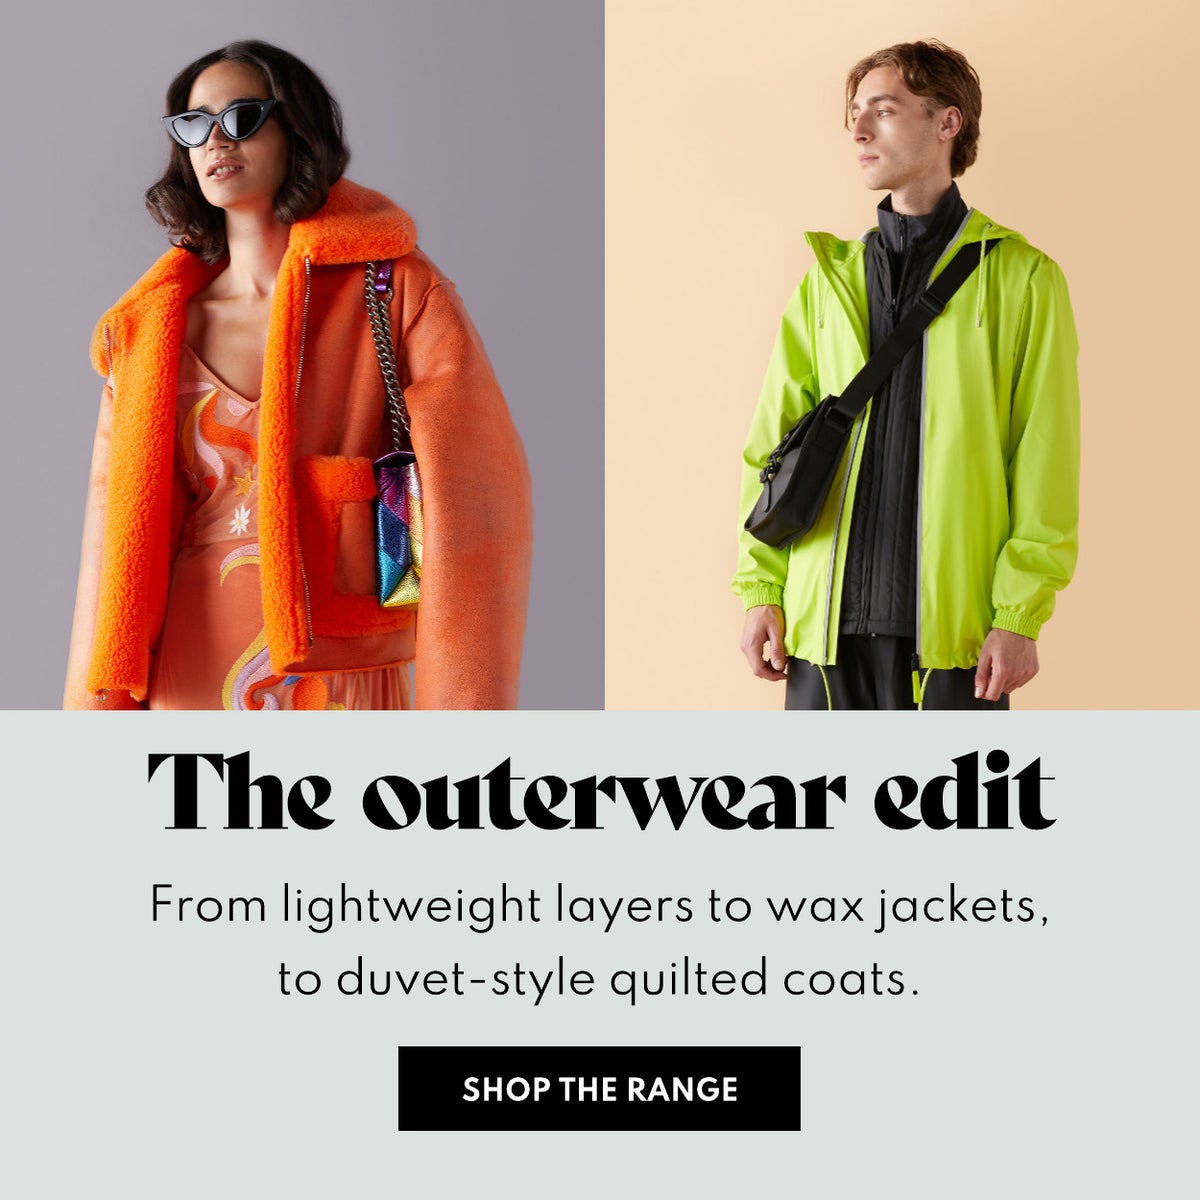 The outerwear edit